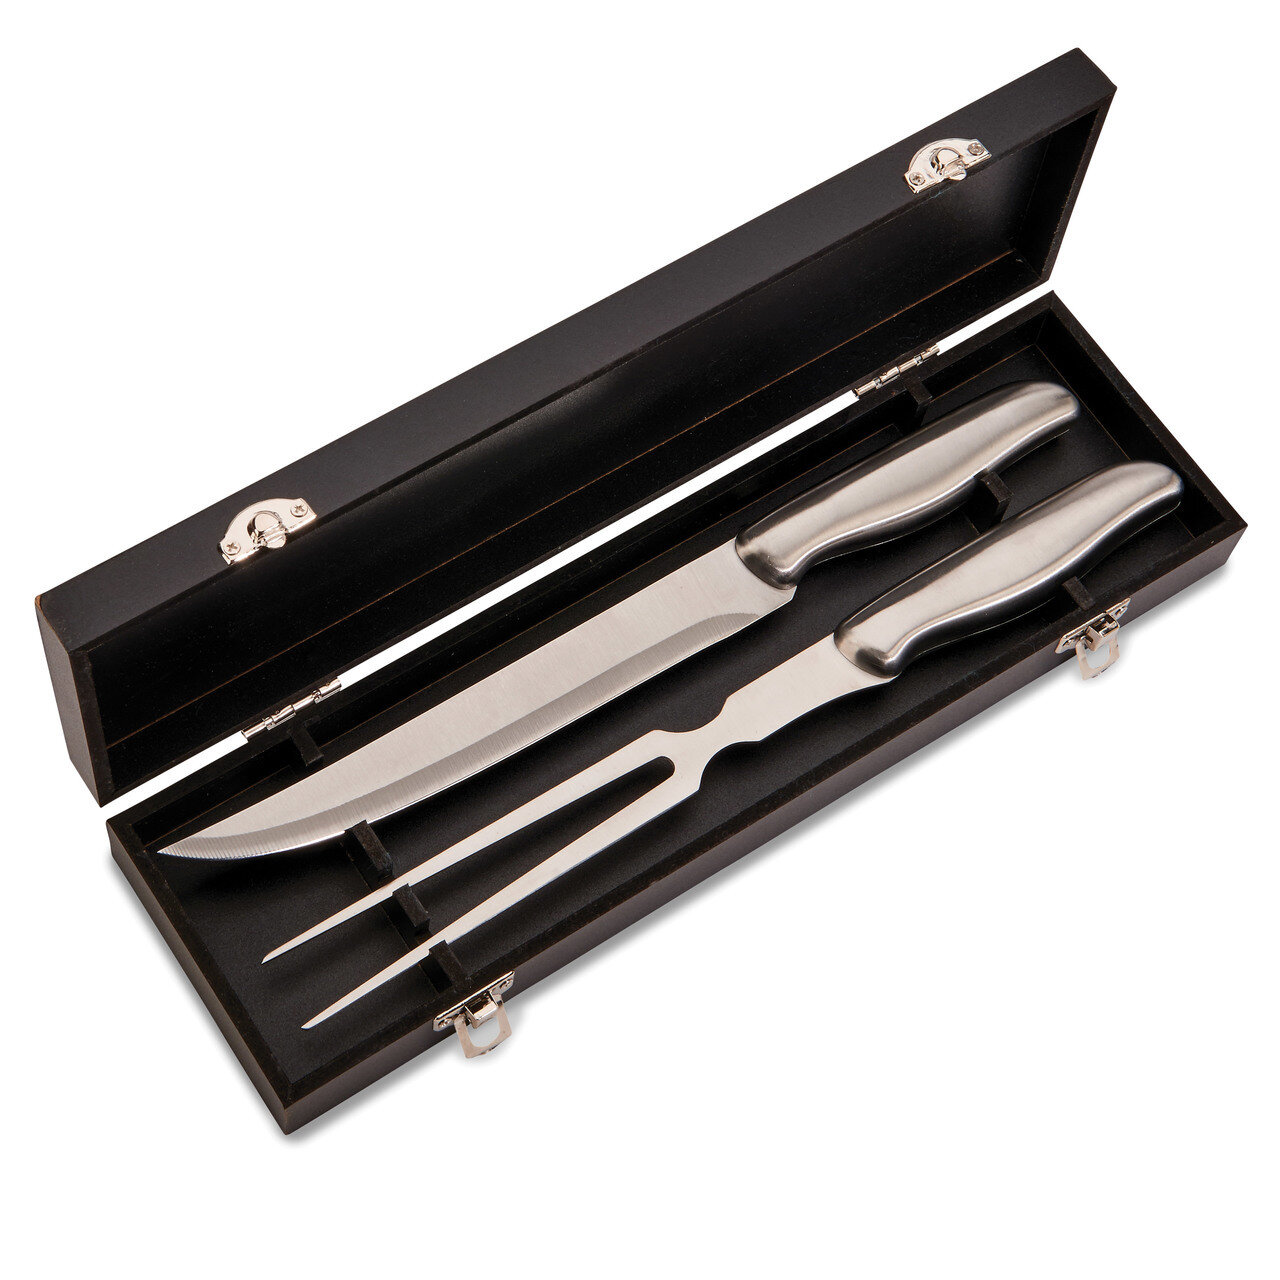 2 Pc Carving Set In Black Box Stainless Steel GM18694